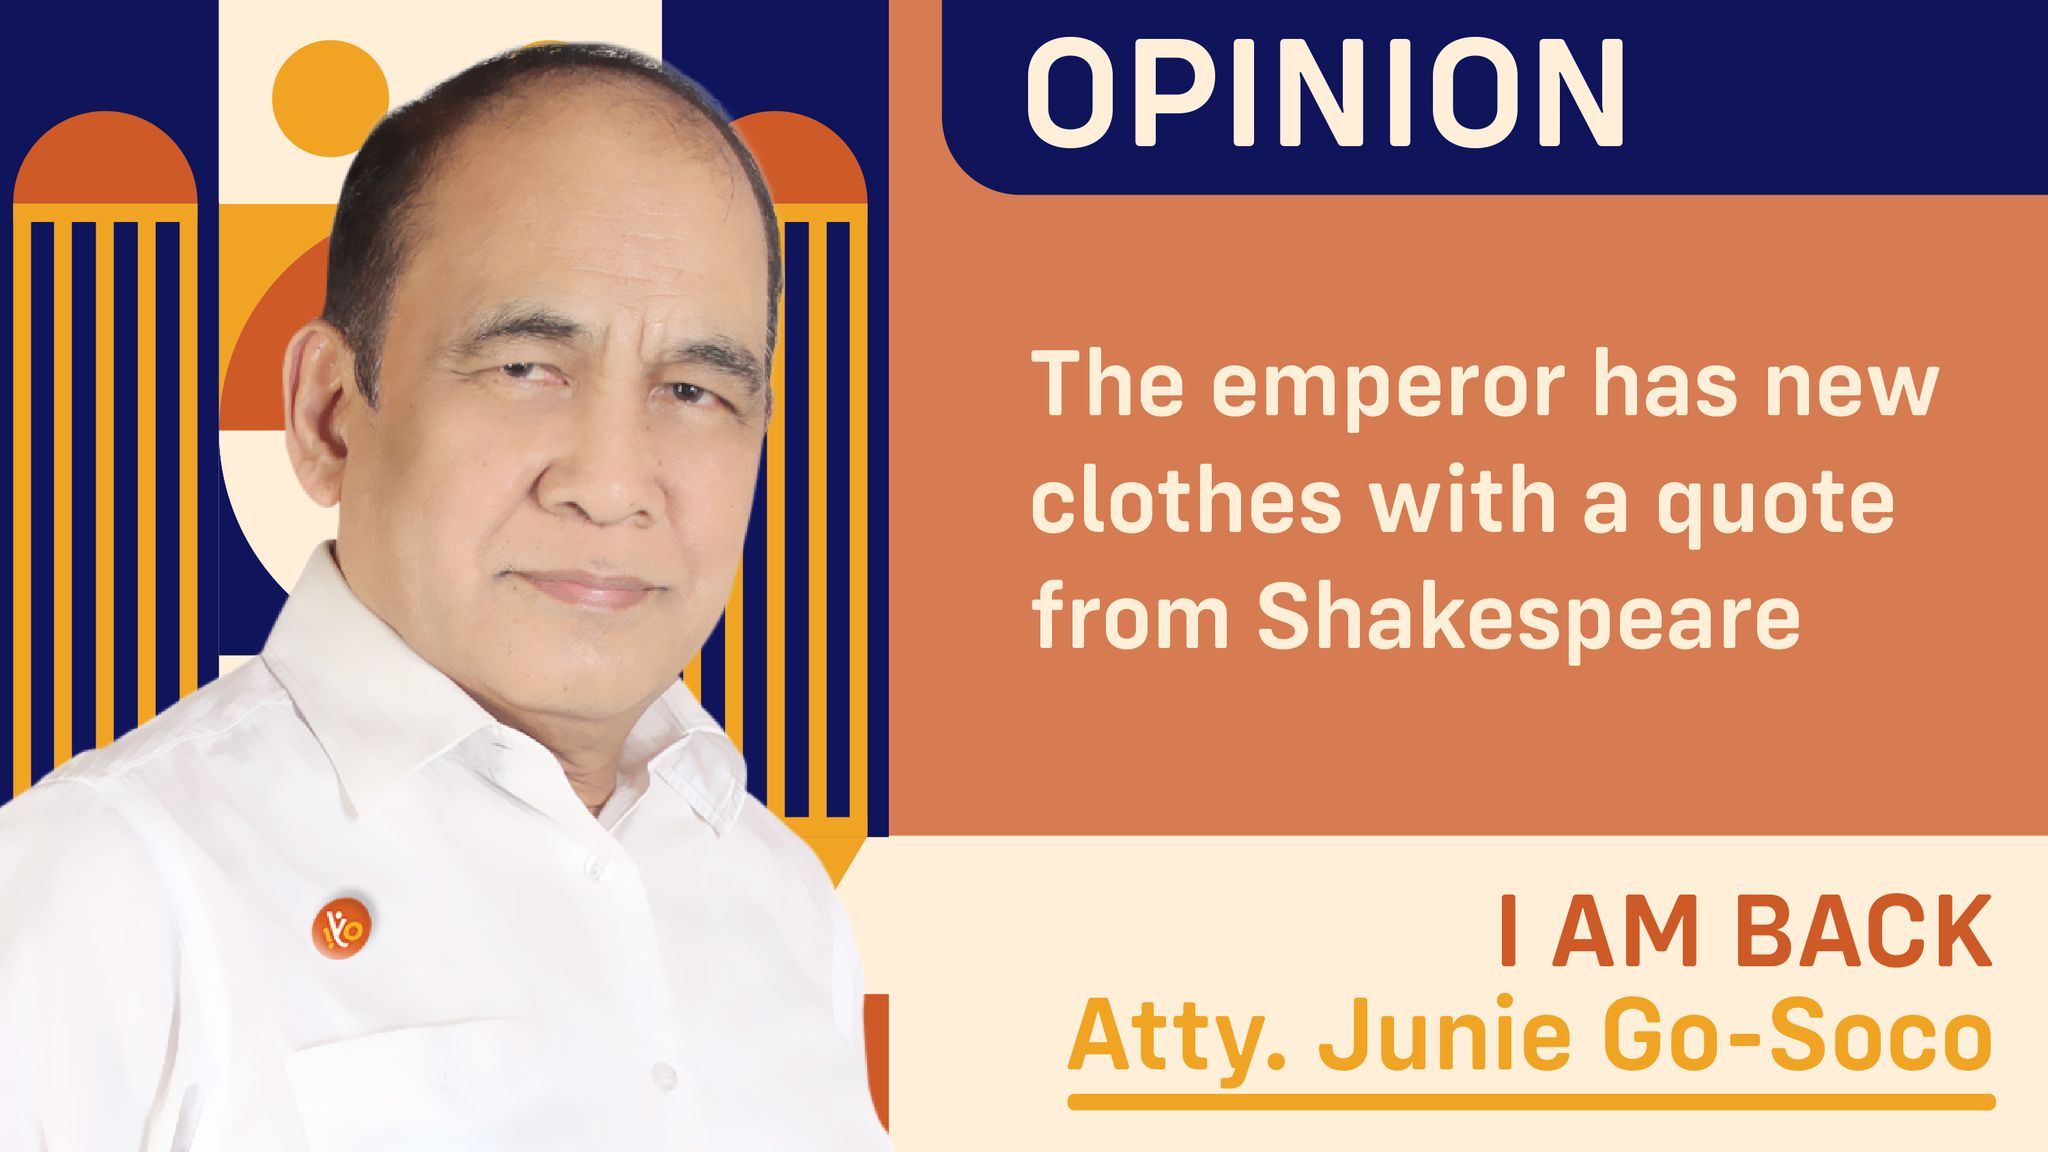 The emperor has new clothes with a quote from Shakespeare